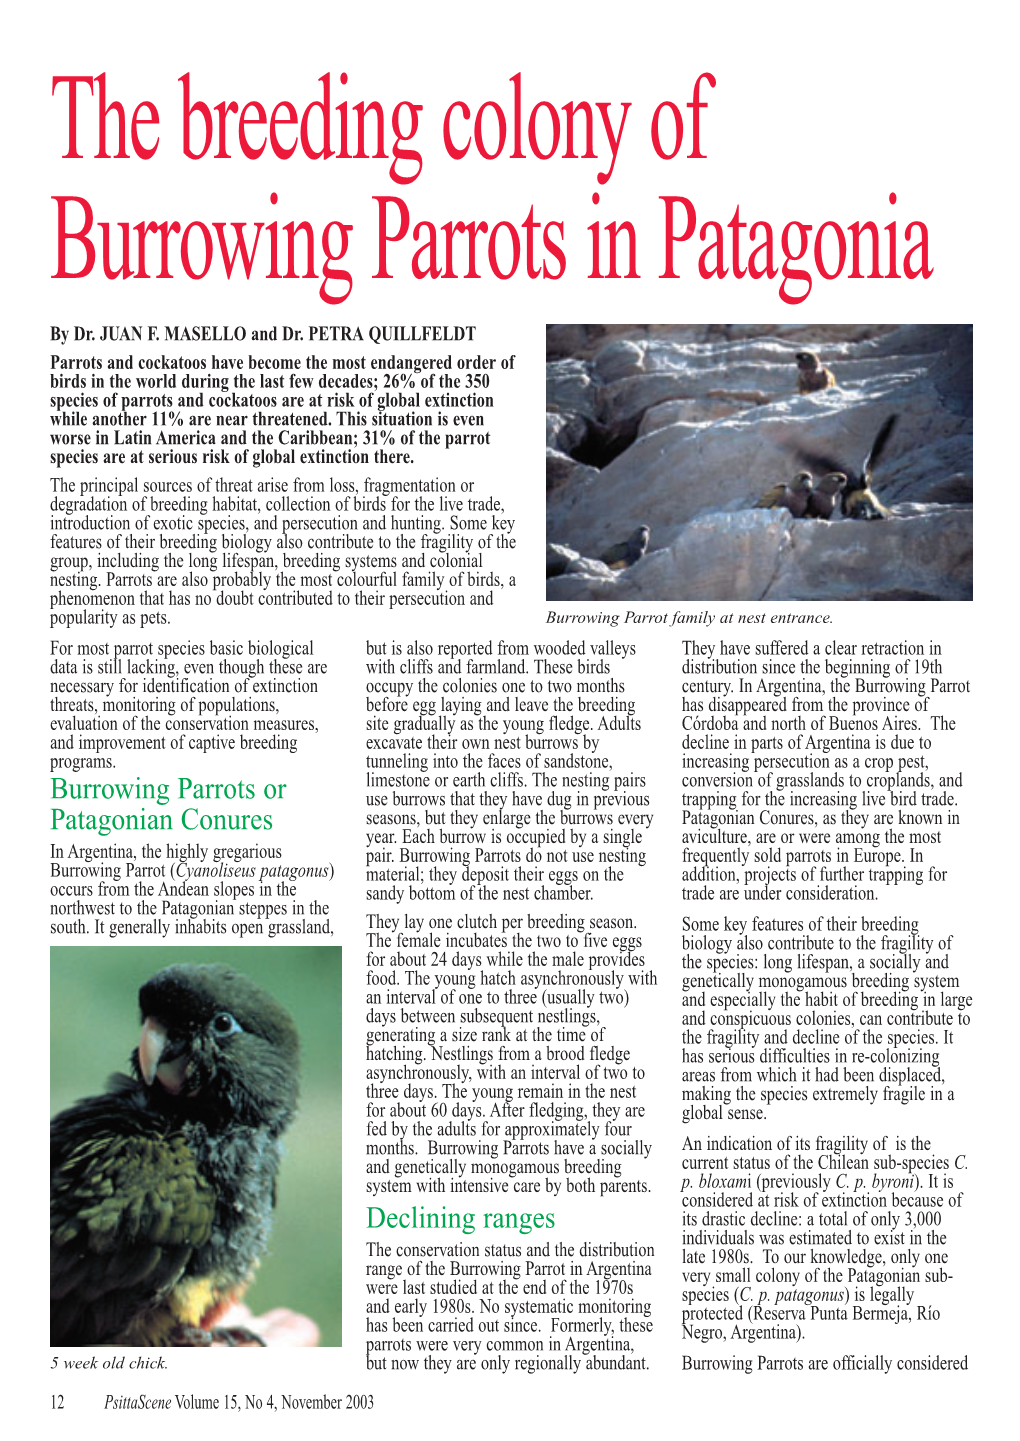 Burrowing Parrots Or Patagonian Conures Declining Ranges